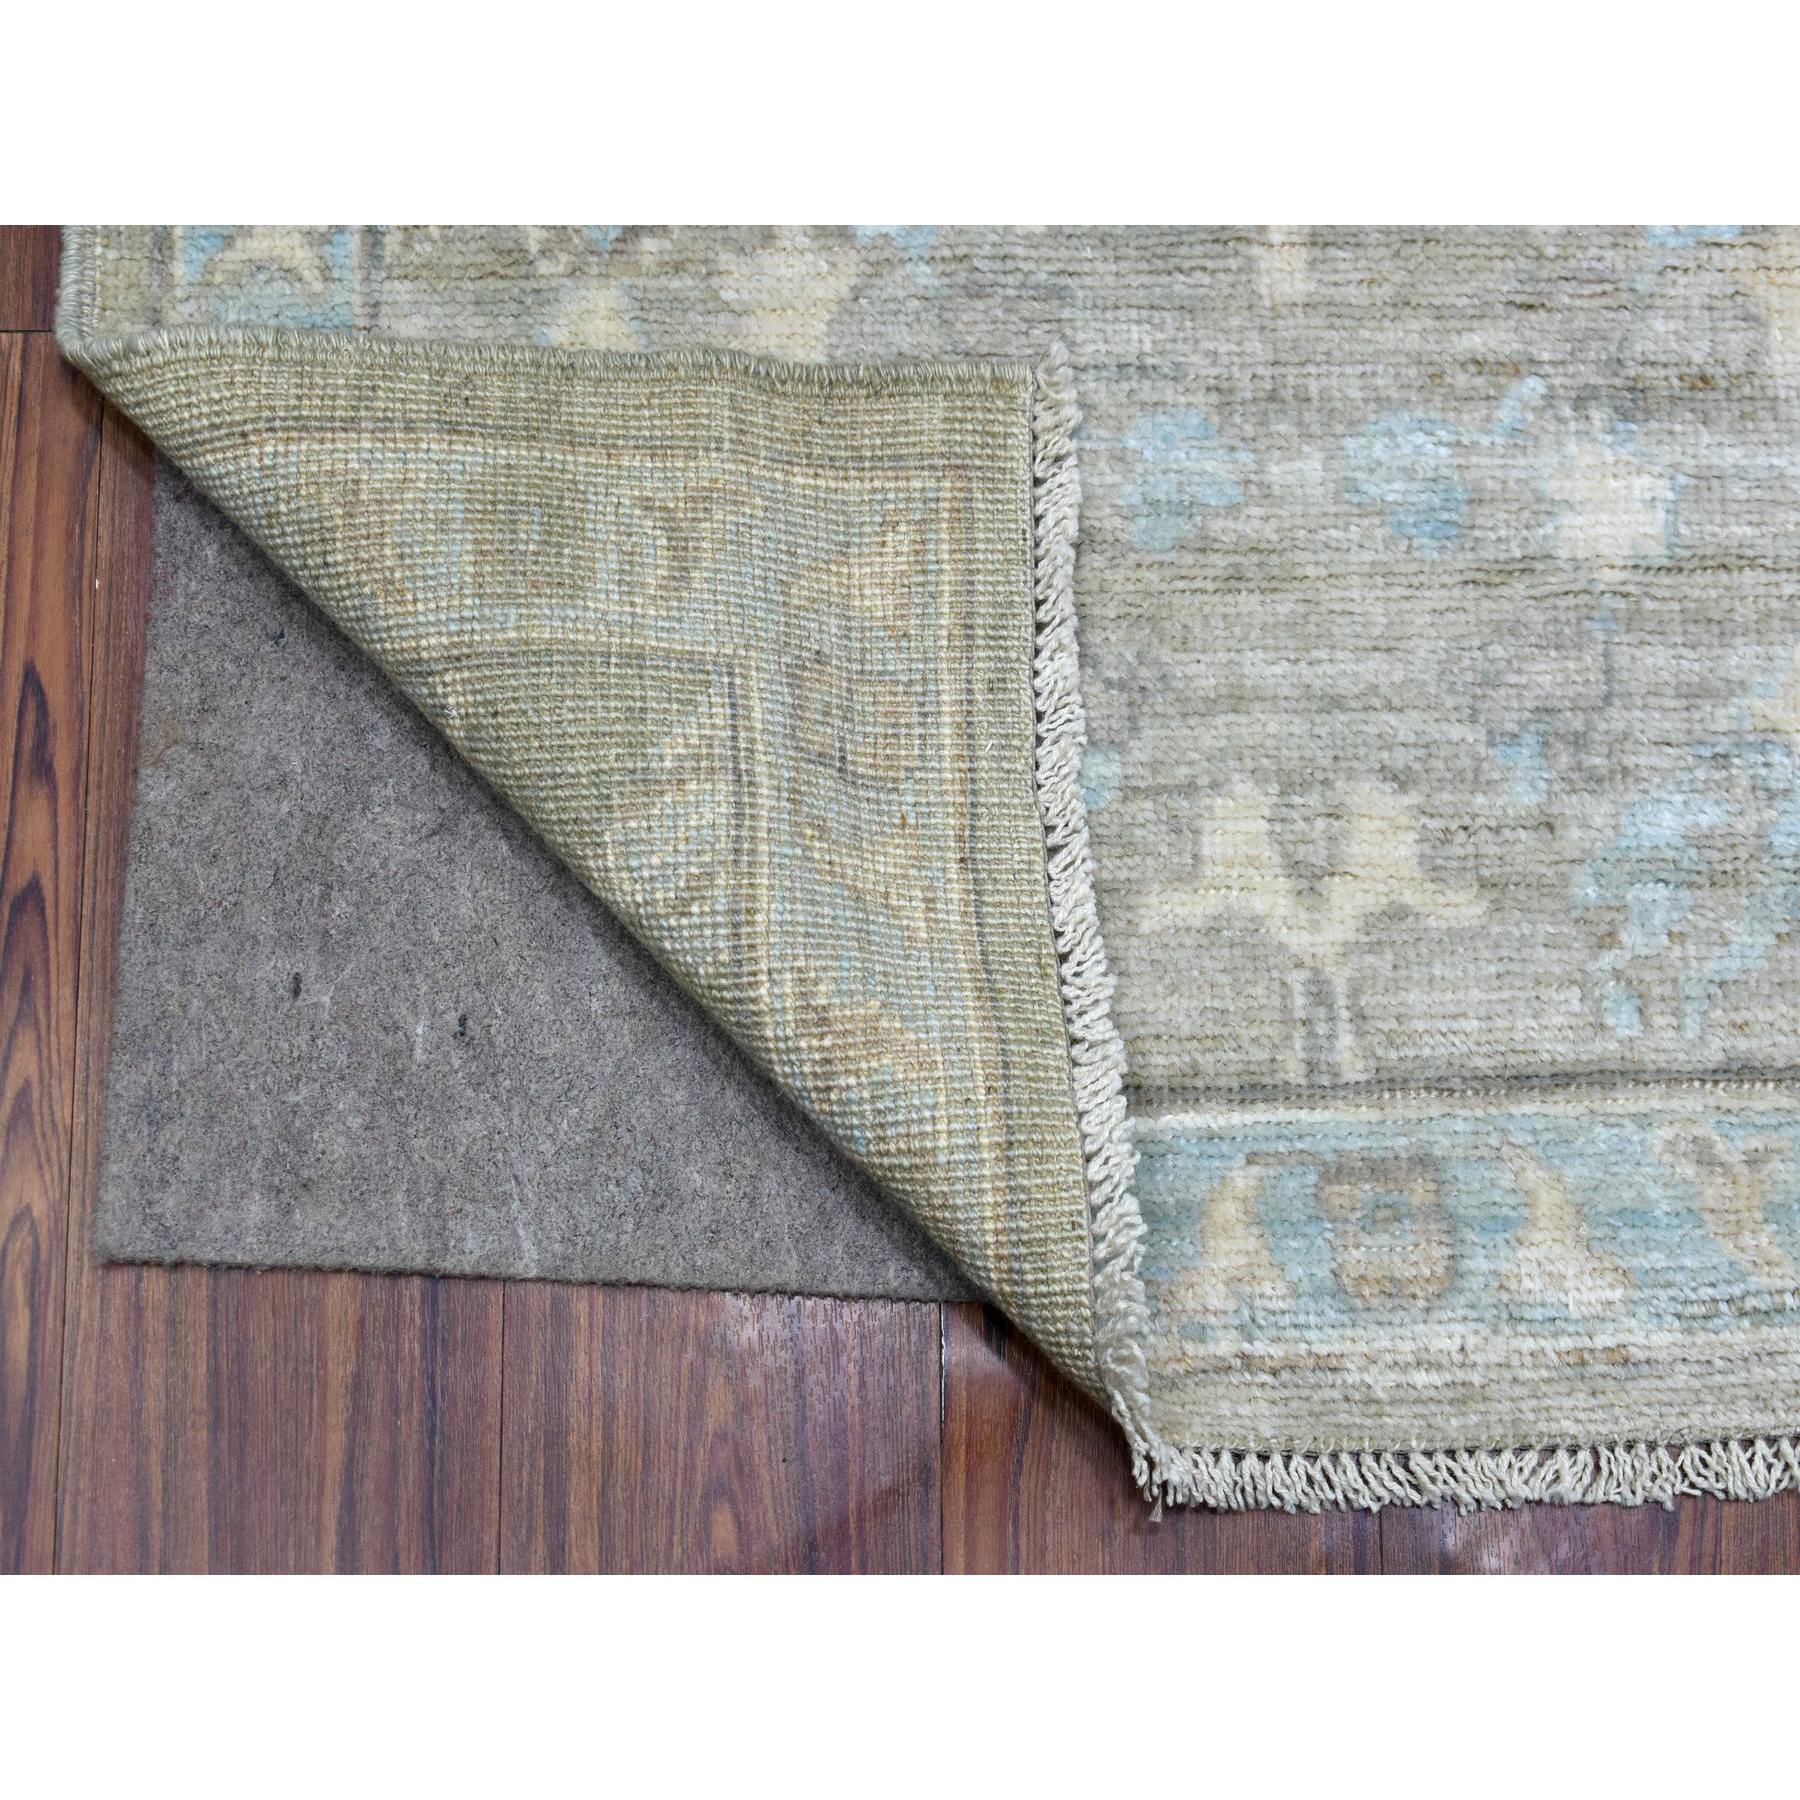 3'x4'9" Gray Afghan Angora Ushak with Touches of Blue Soft, Velvety Plush Pure Wool Hand Woven Oriental Rug 